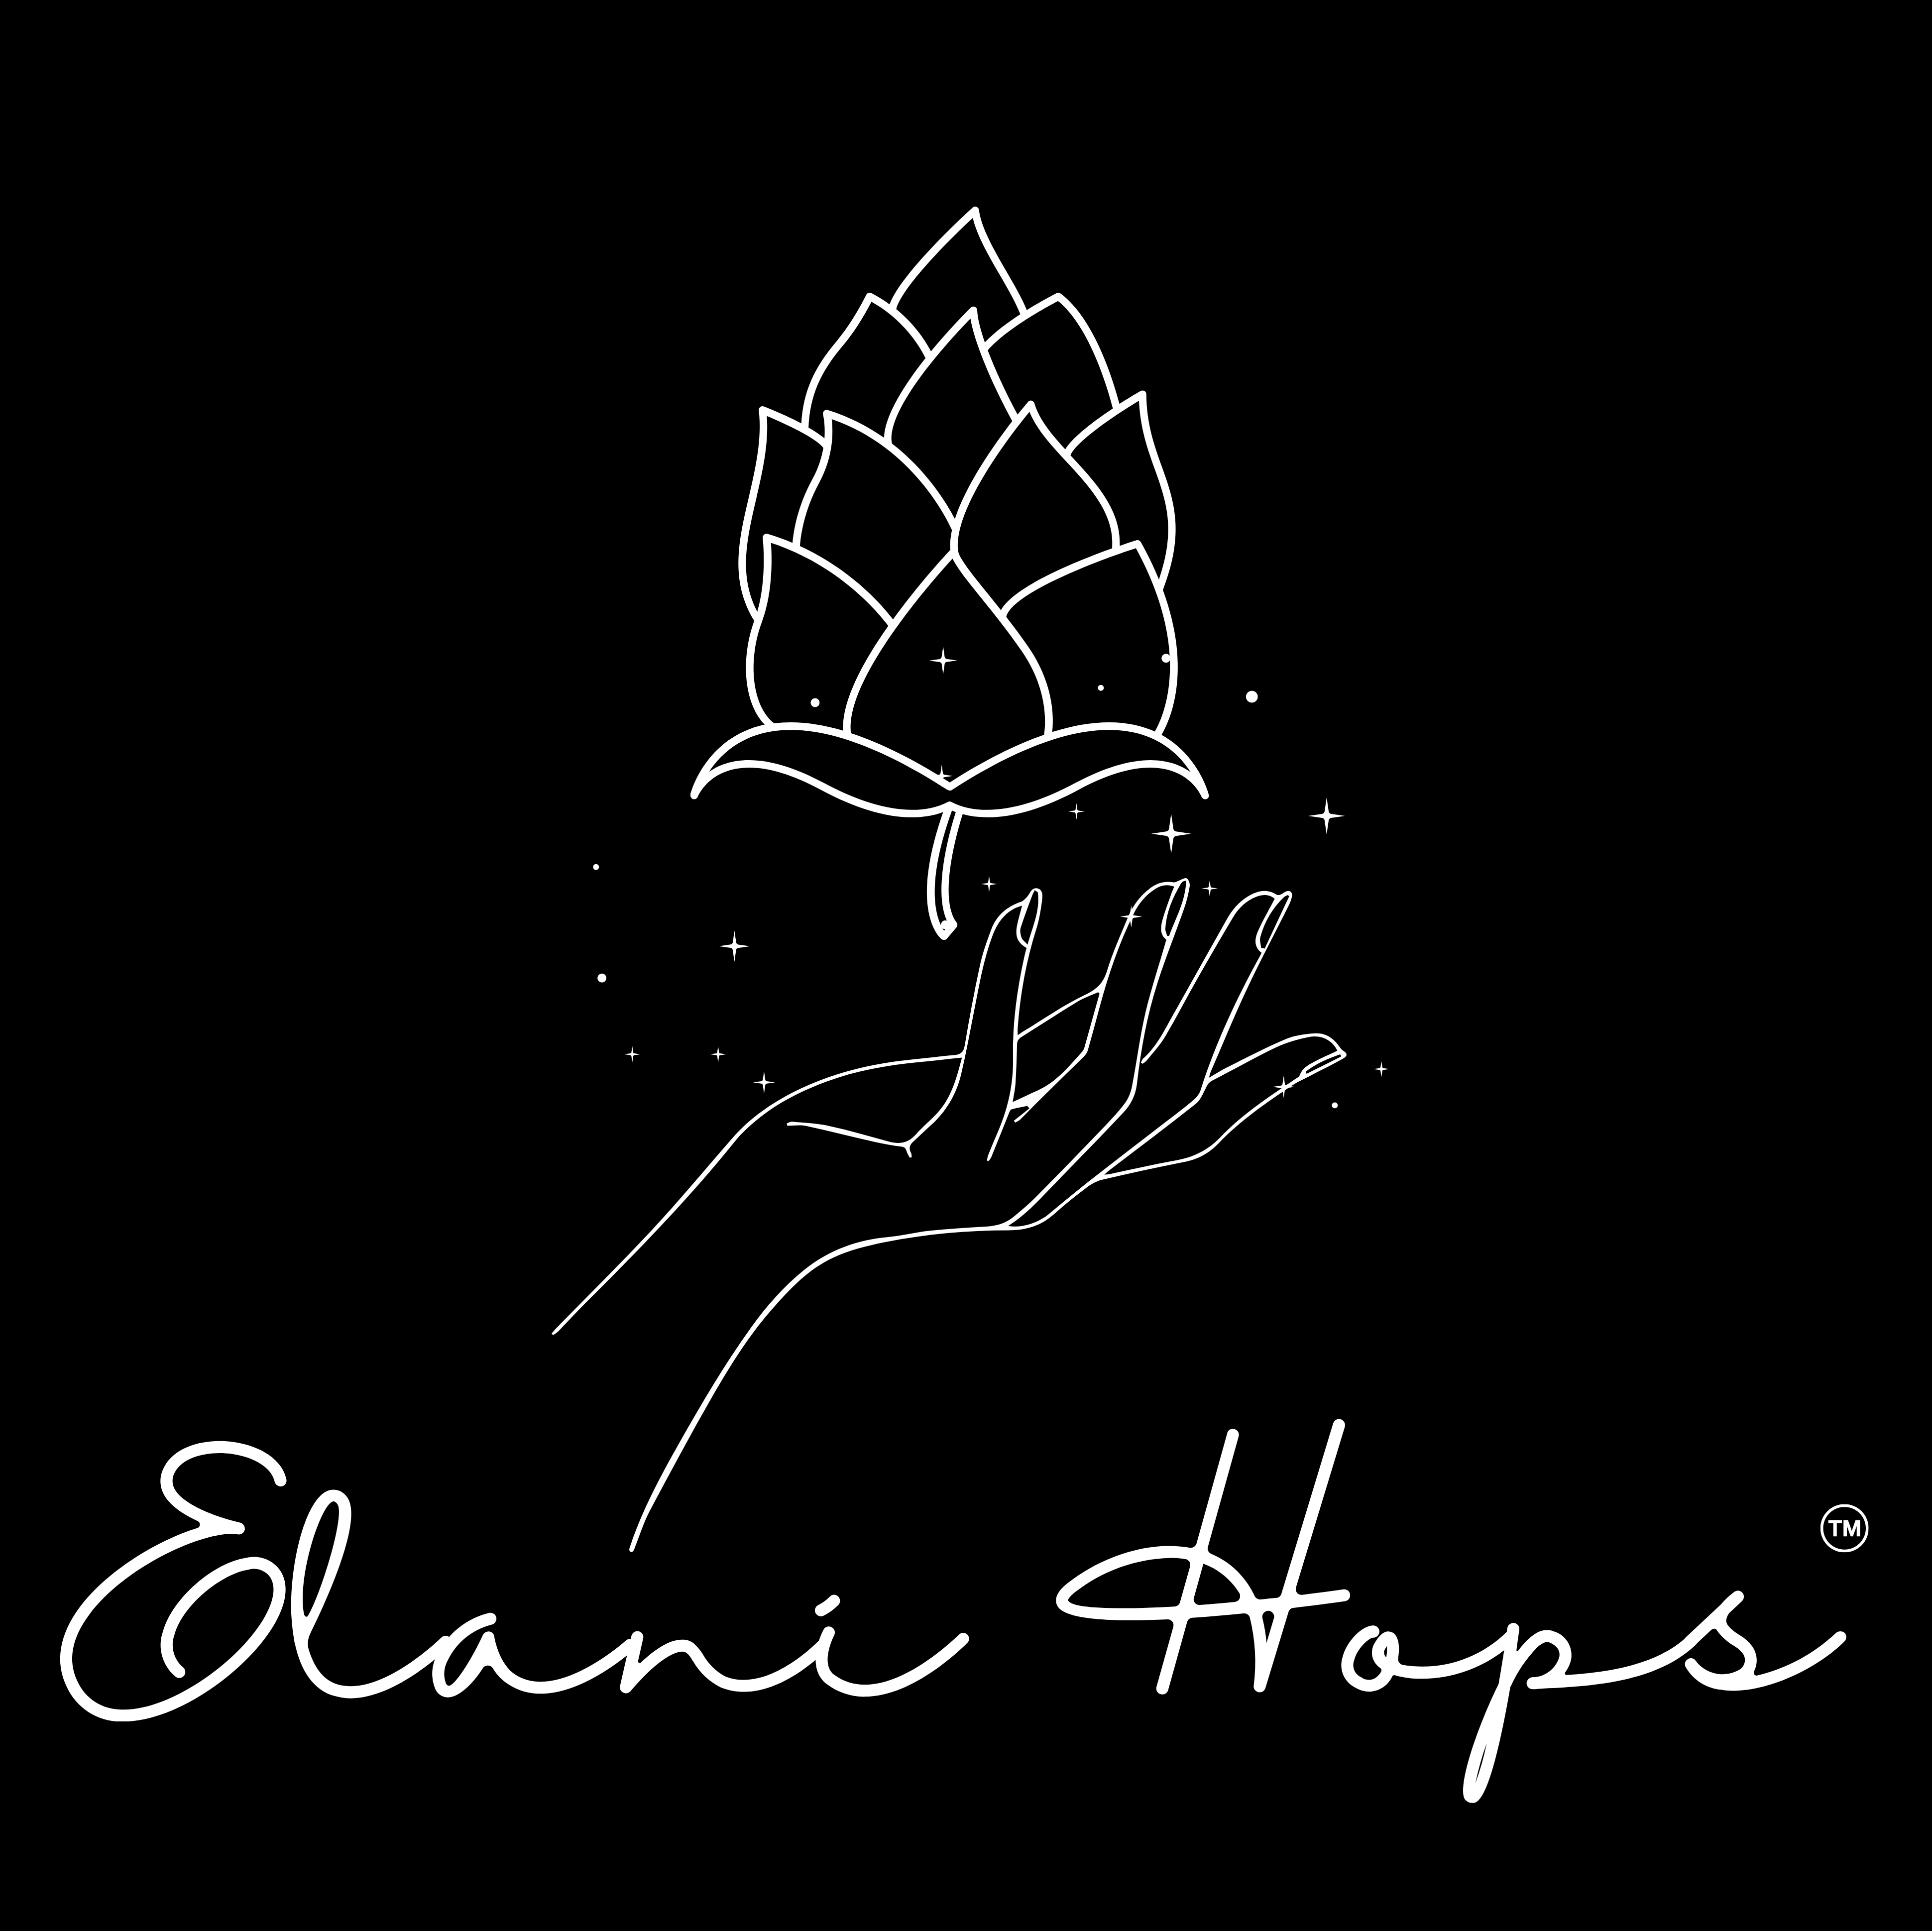 Black & white illustration of a hand holding a hop cone